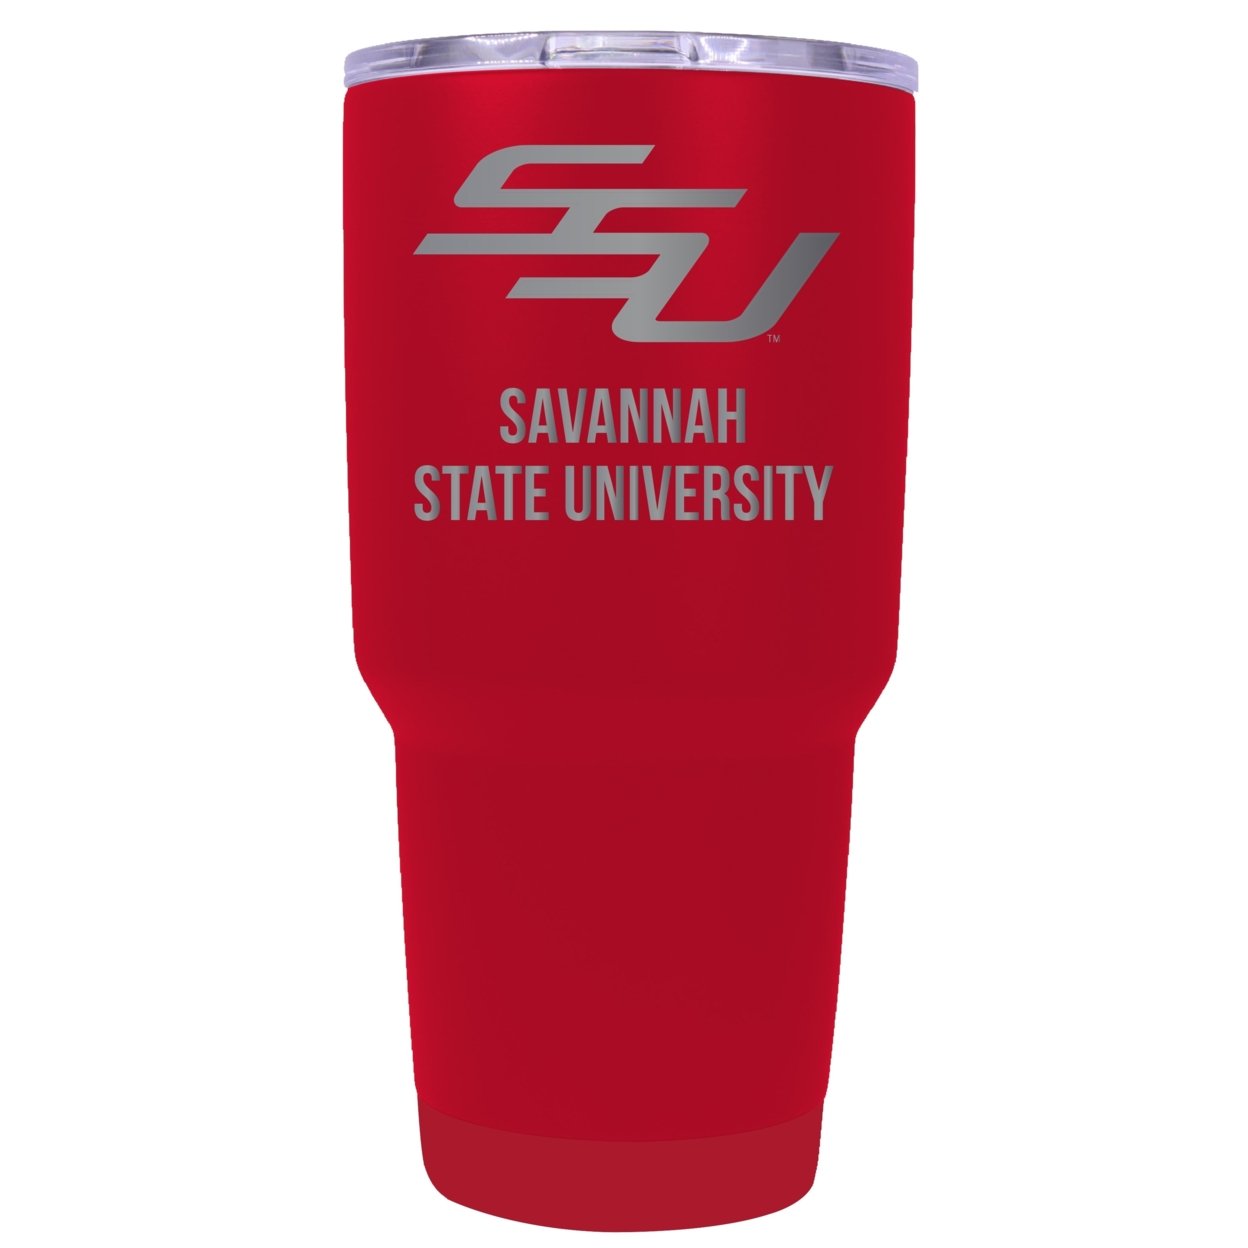 Savannah State University 24 Oz Laser Engraved Stainless Steel Insulated Tumbler - Choose Your Color. - Red